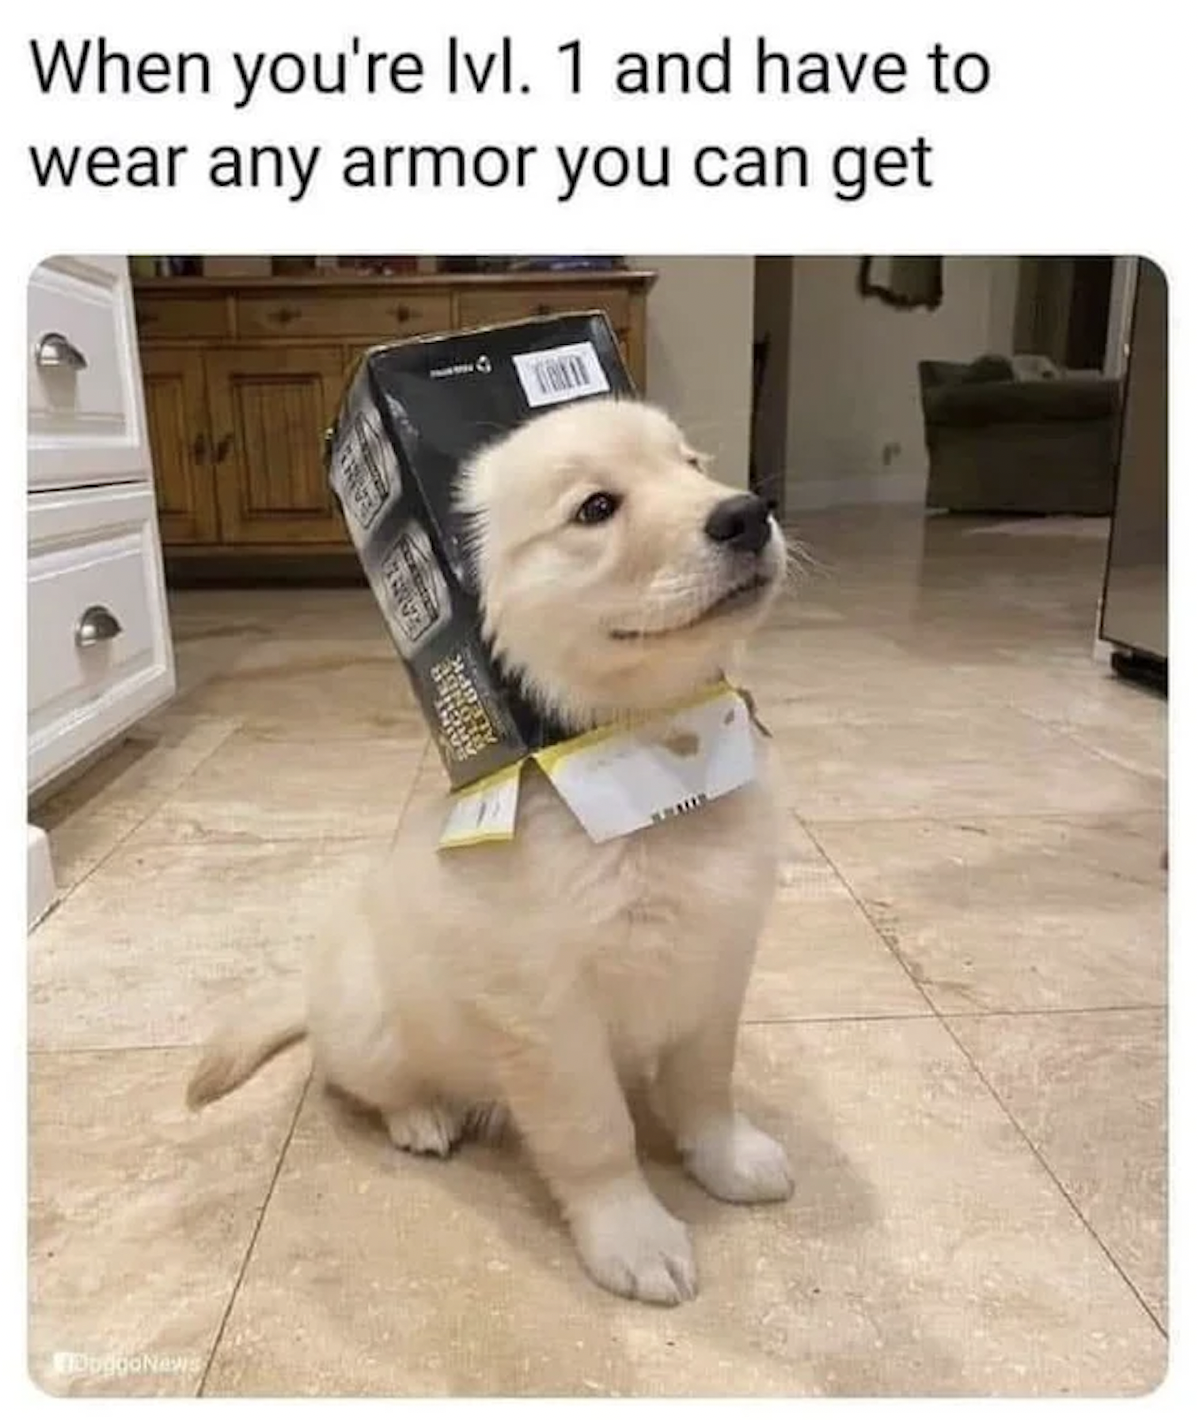 Gaming memes - gaming dog meme - When you're lvl. 1 and have to wear any armor you can get